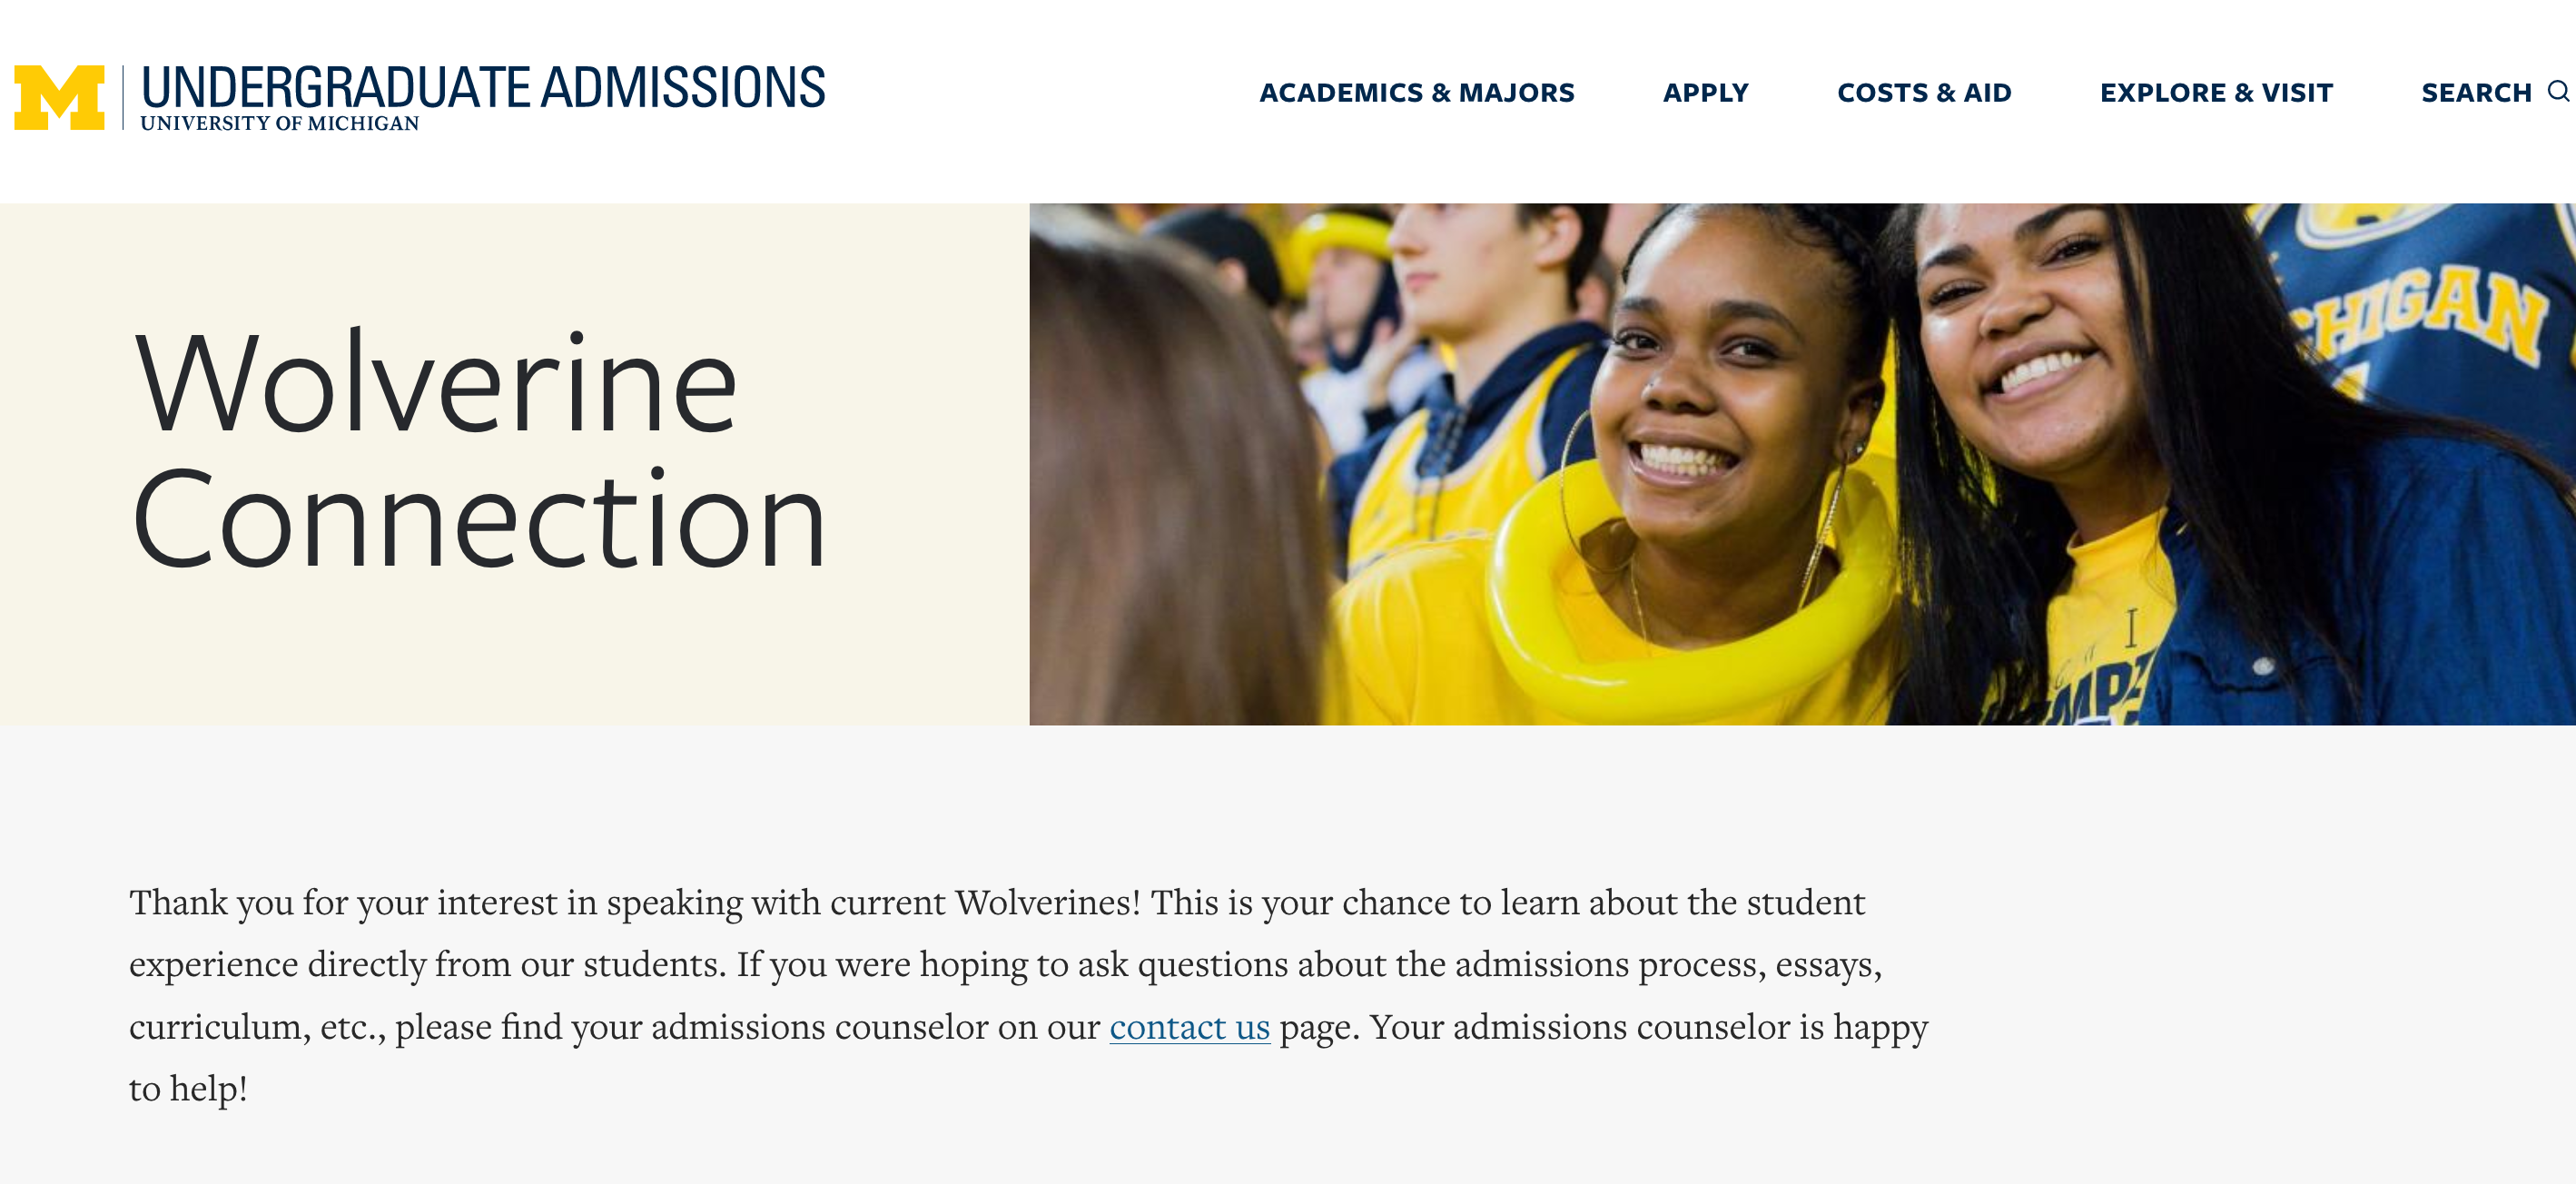 Wolverine Connection resource on the admissions website